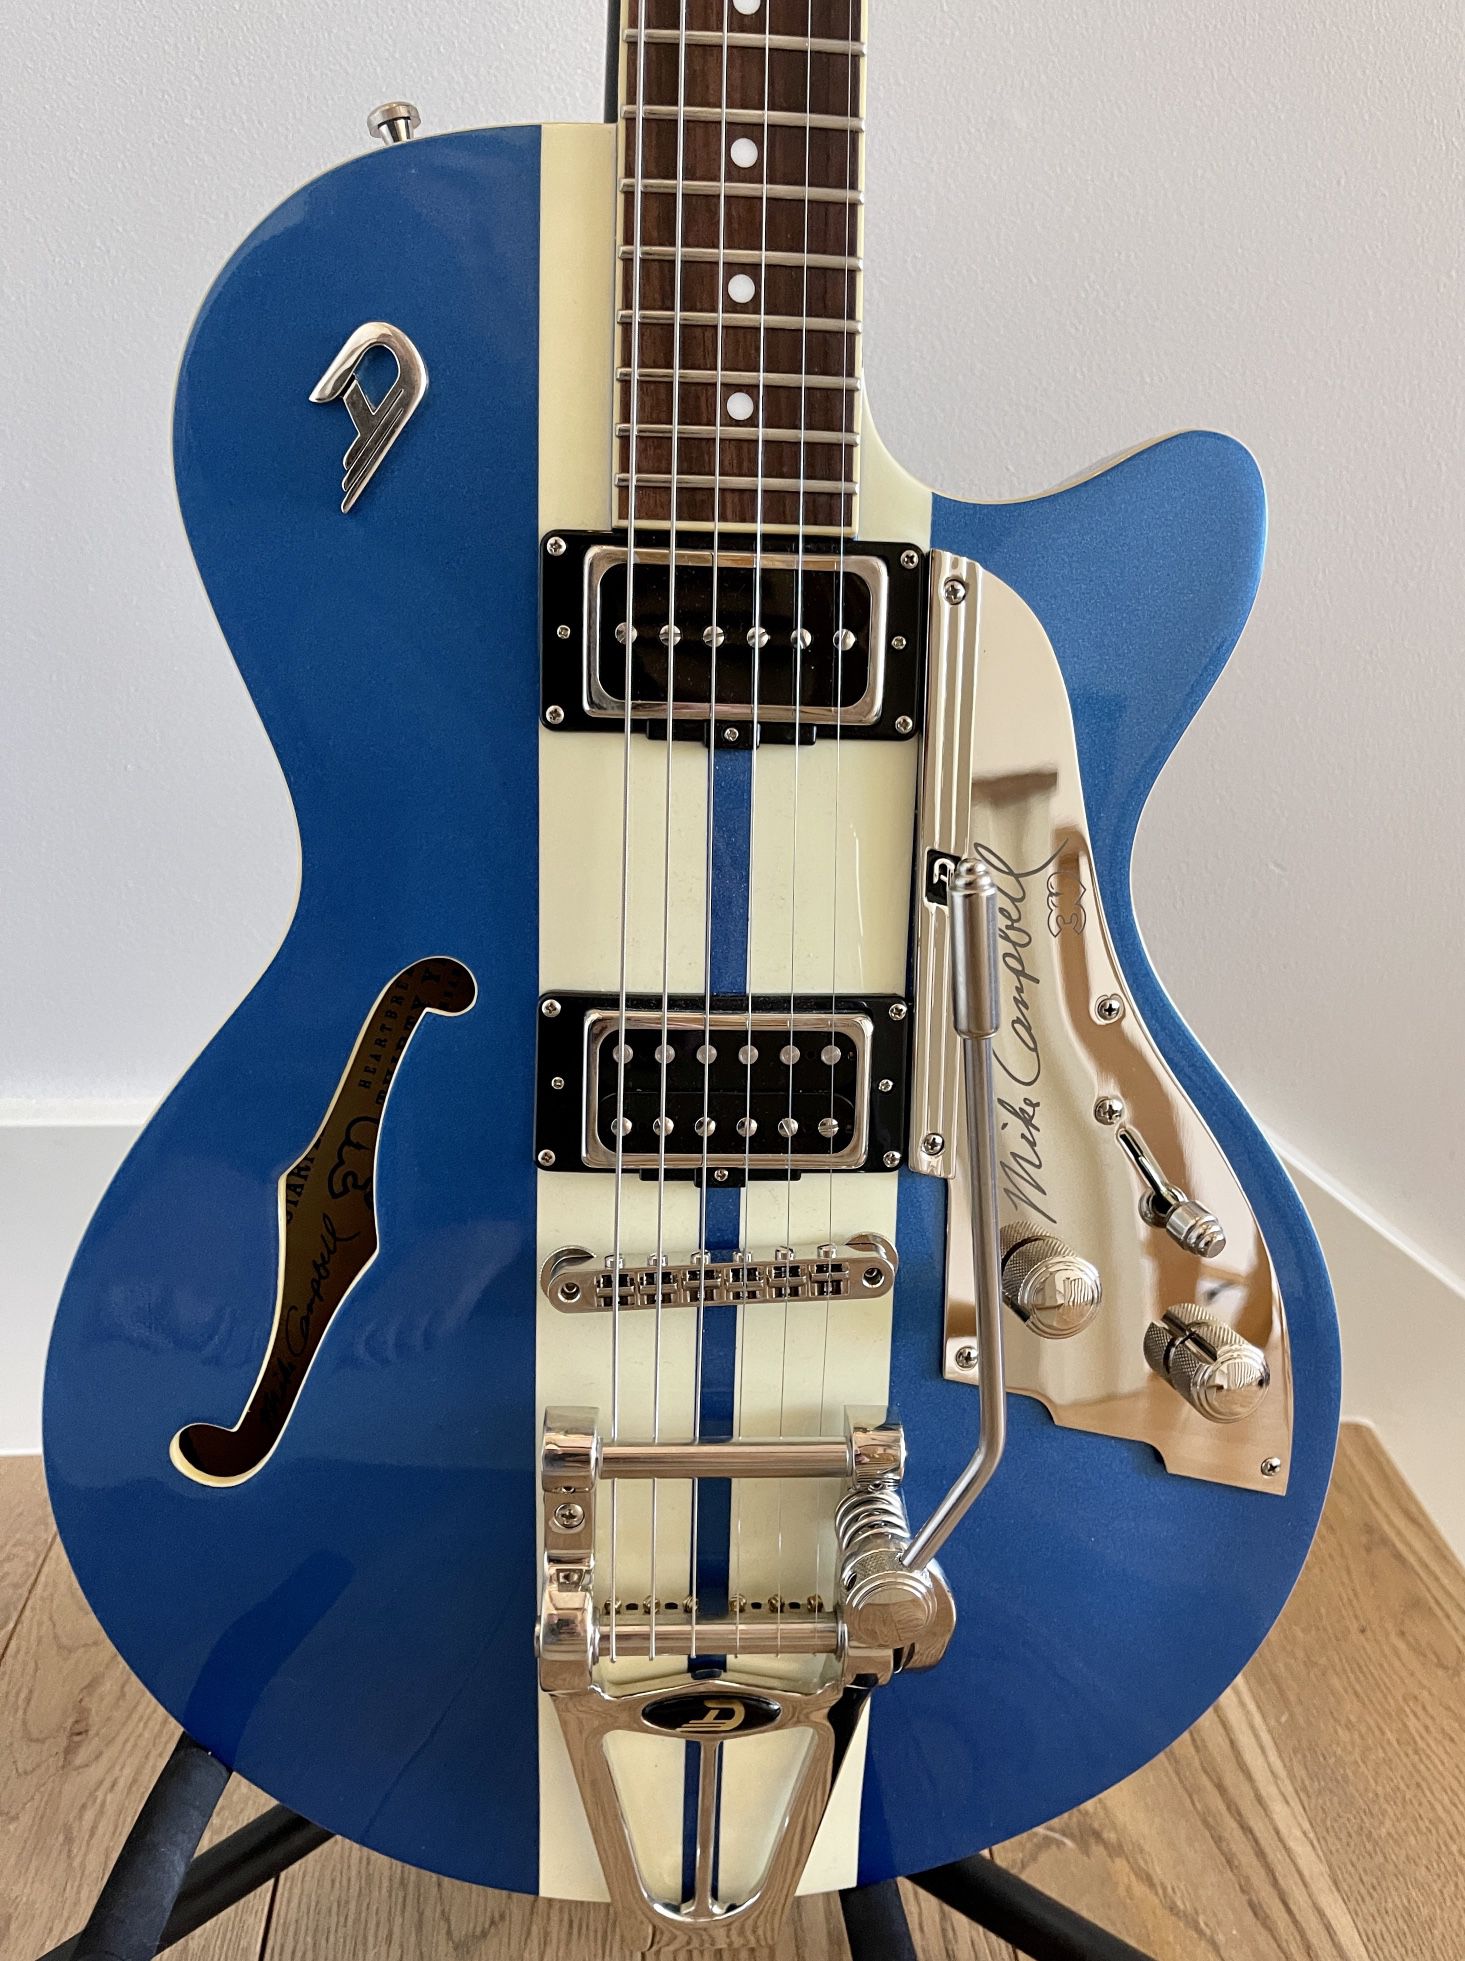 Mint Condition Duesenberg Starplayer TV Mike Campbell Edition Electric Guitar - Lake Placid Blue